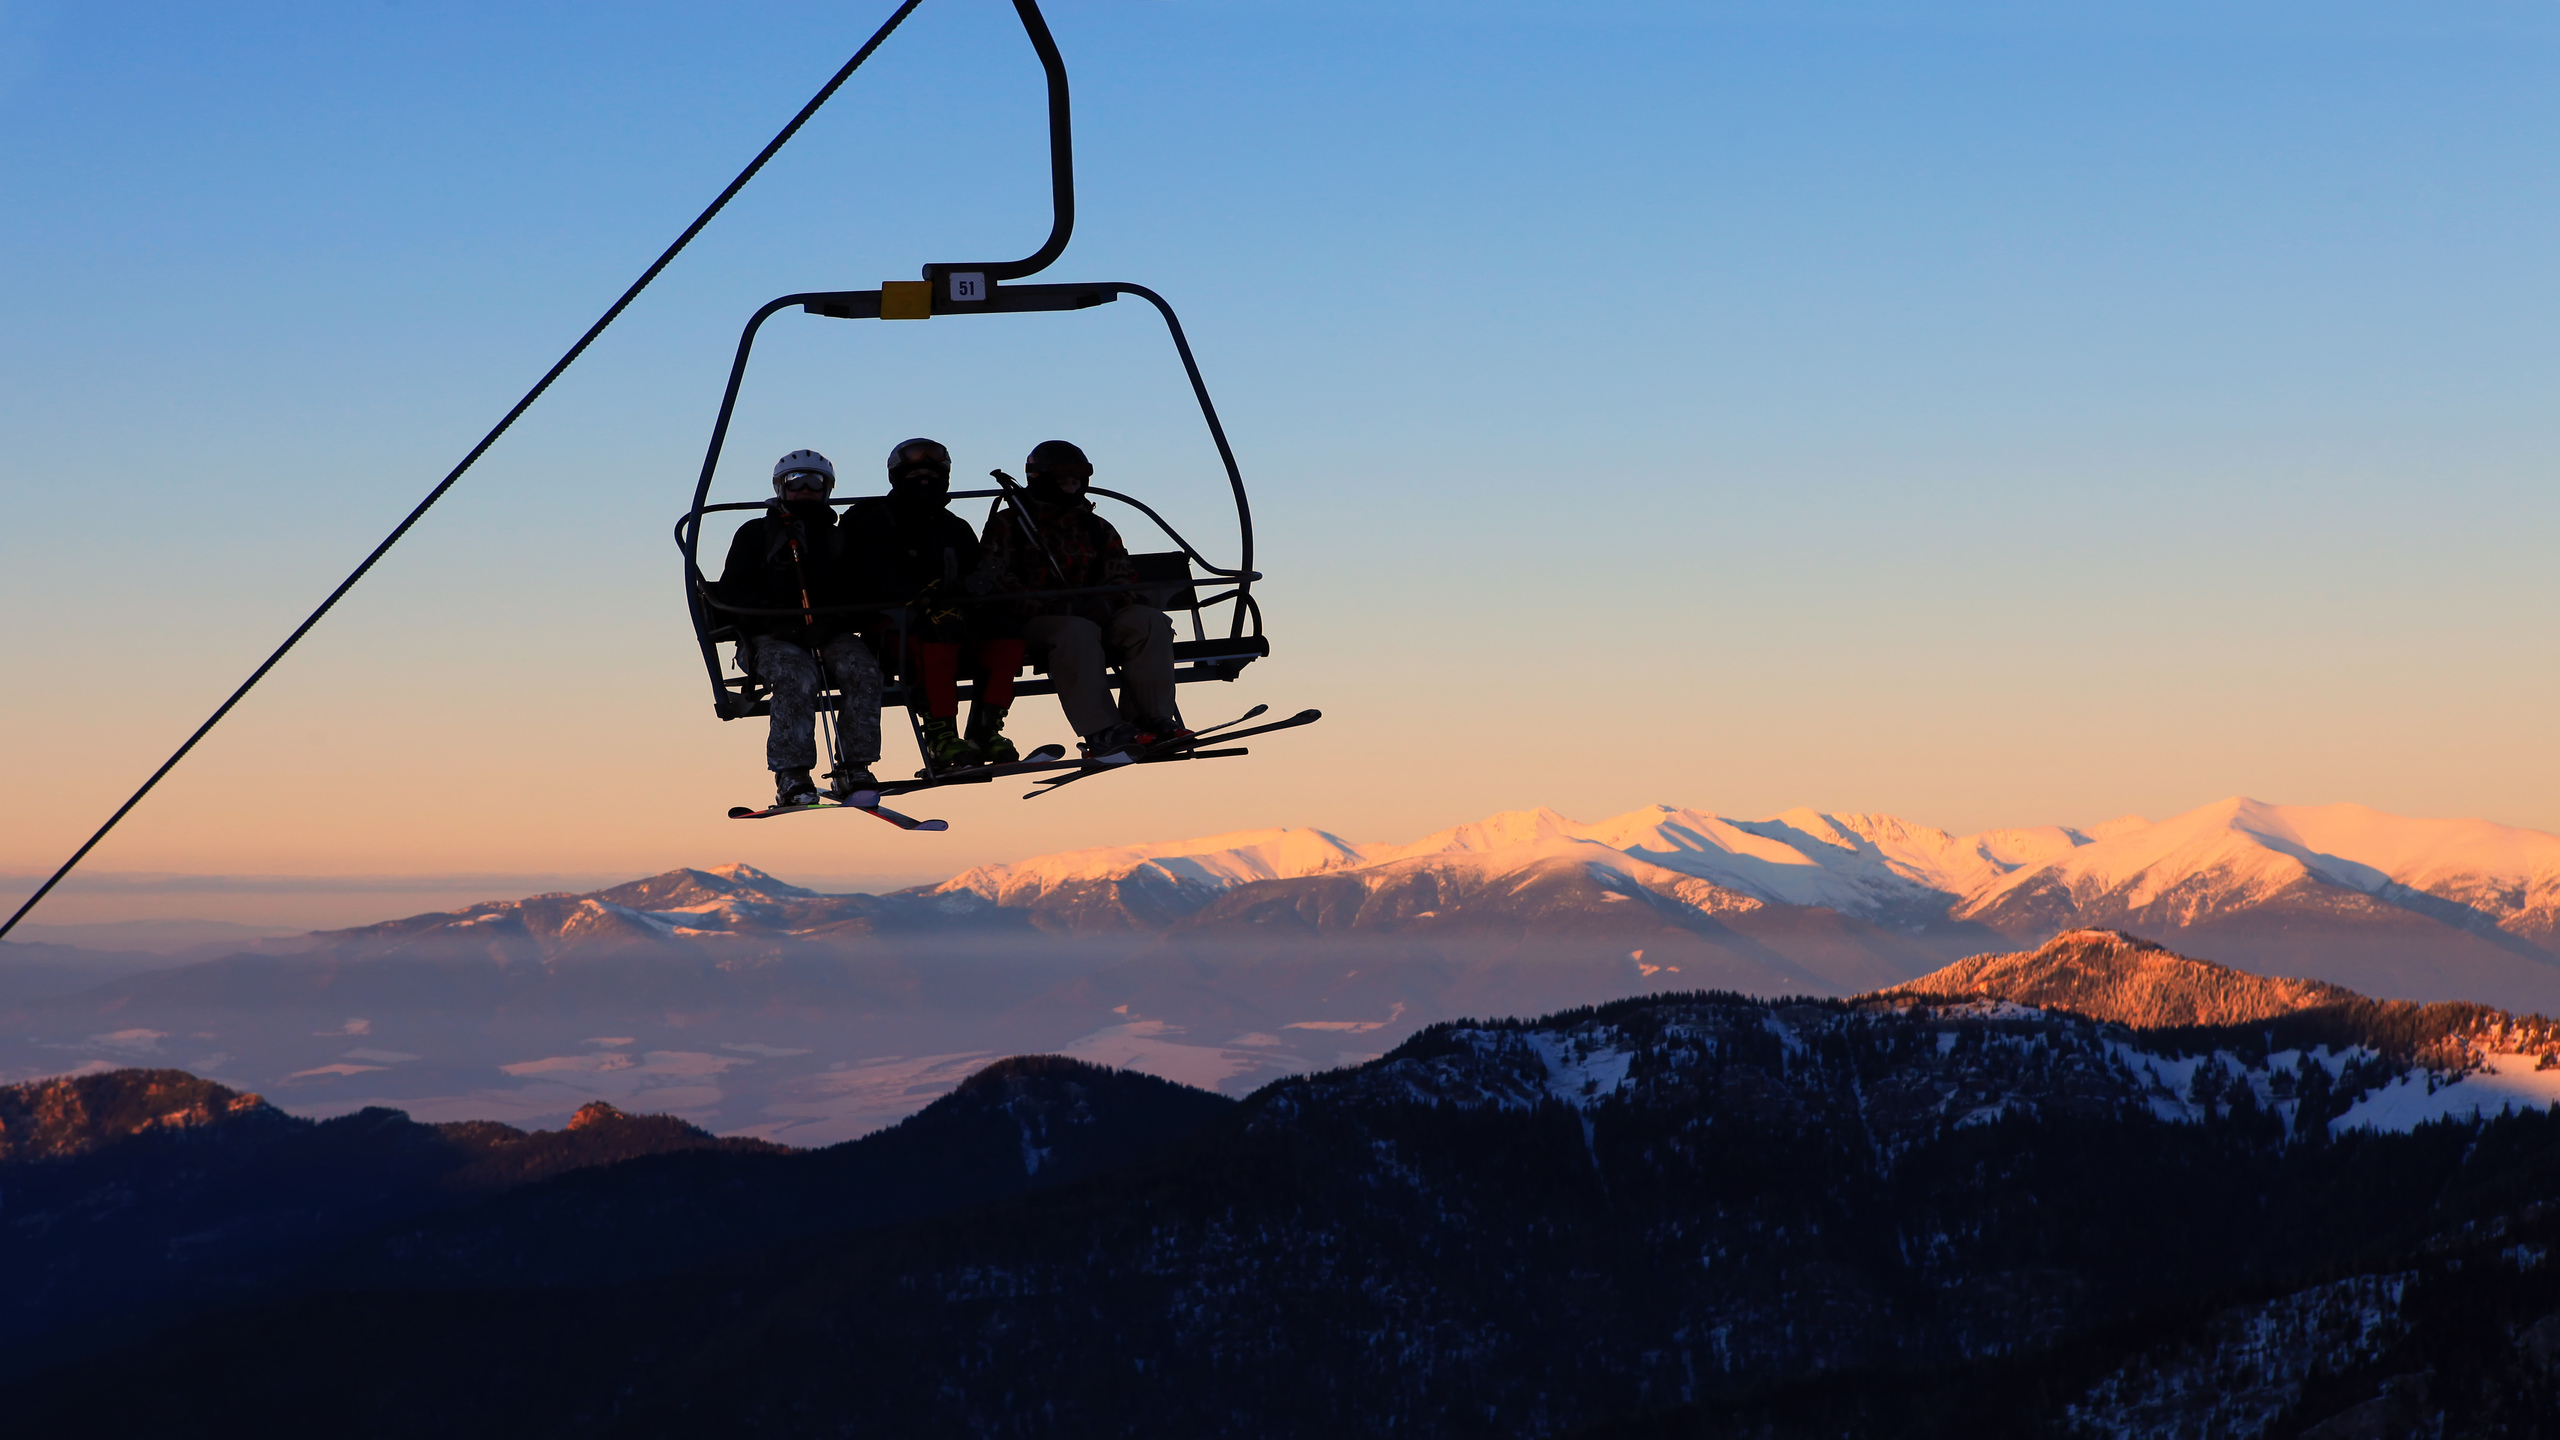 Silhouette of skiers on a chairlift with a mountain vista behind them during sunset